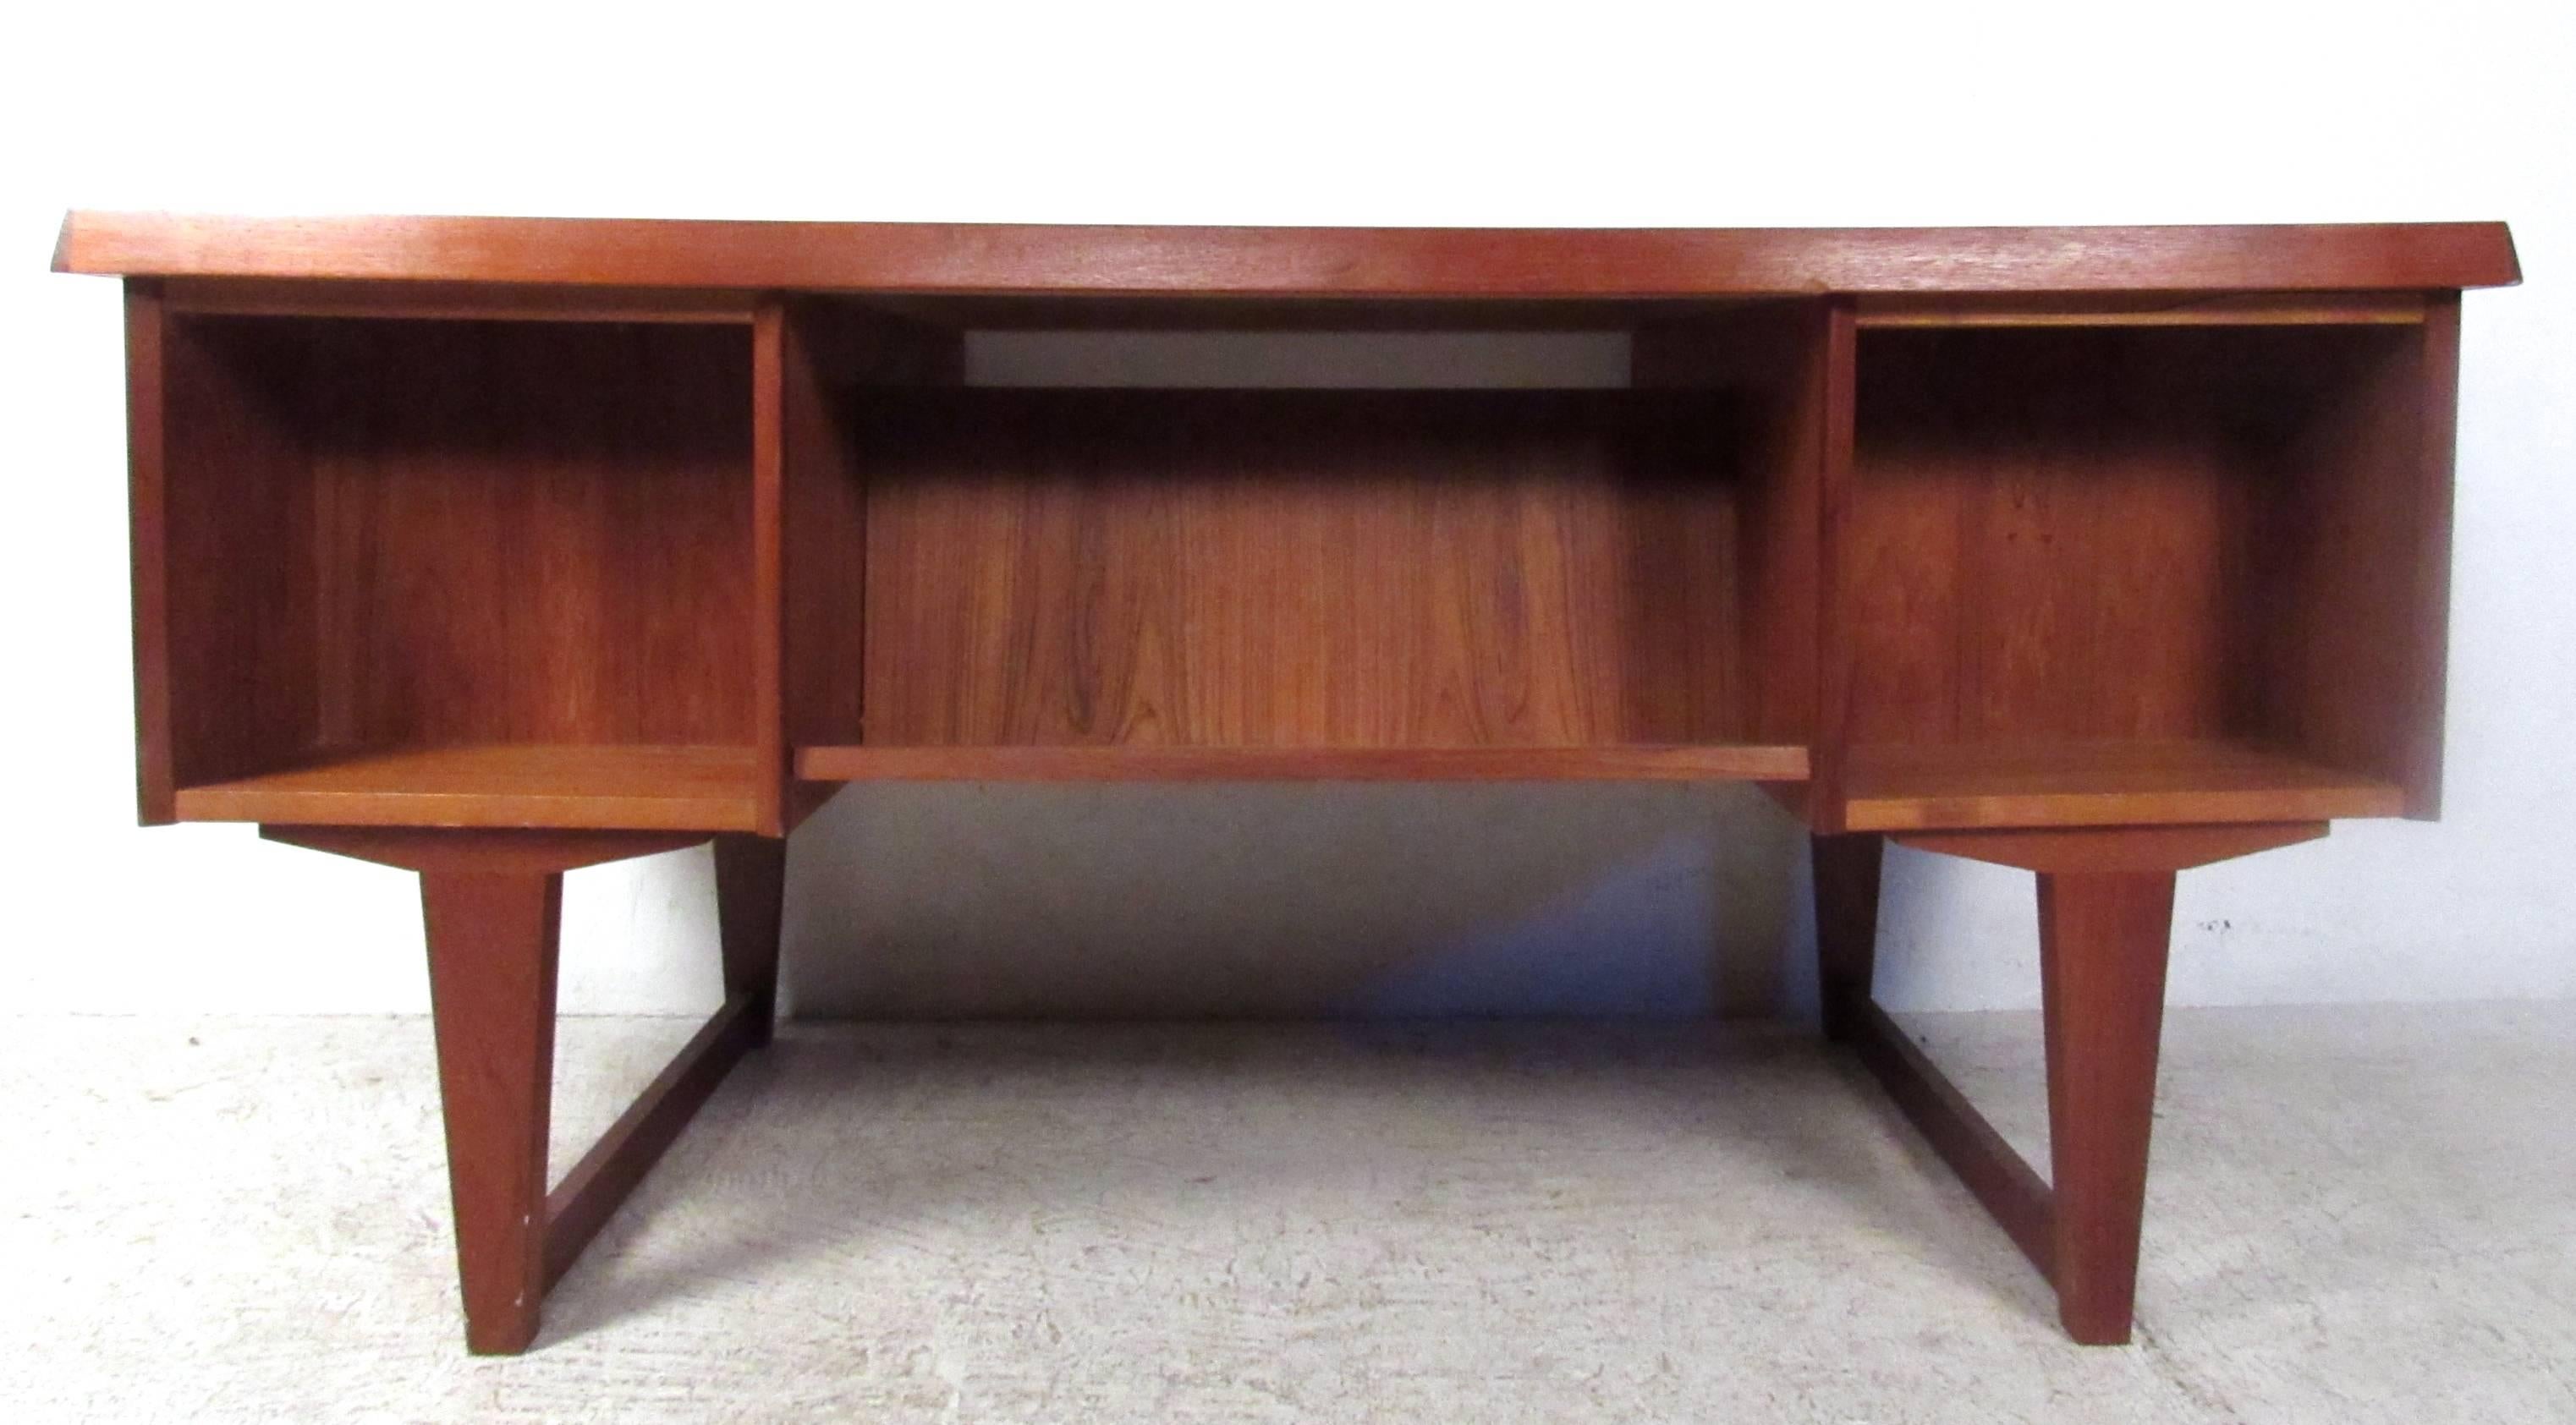 This stunning mid-century desk offers a unique workspace for home or office. The stylish tapered sled leg design is highly sought after, while the added shelves on the rear of the desk offers storage or display space. Carved drawer pulls and vintage